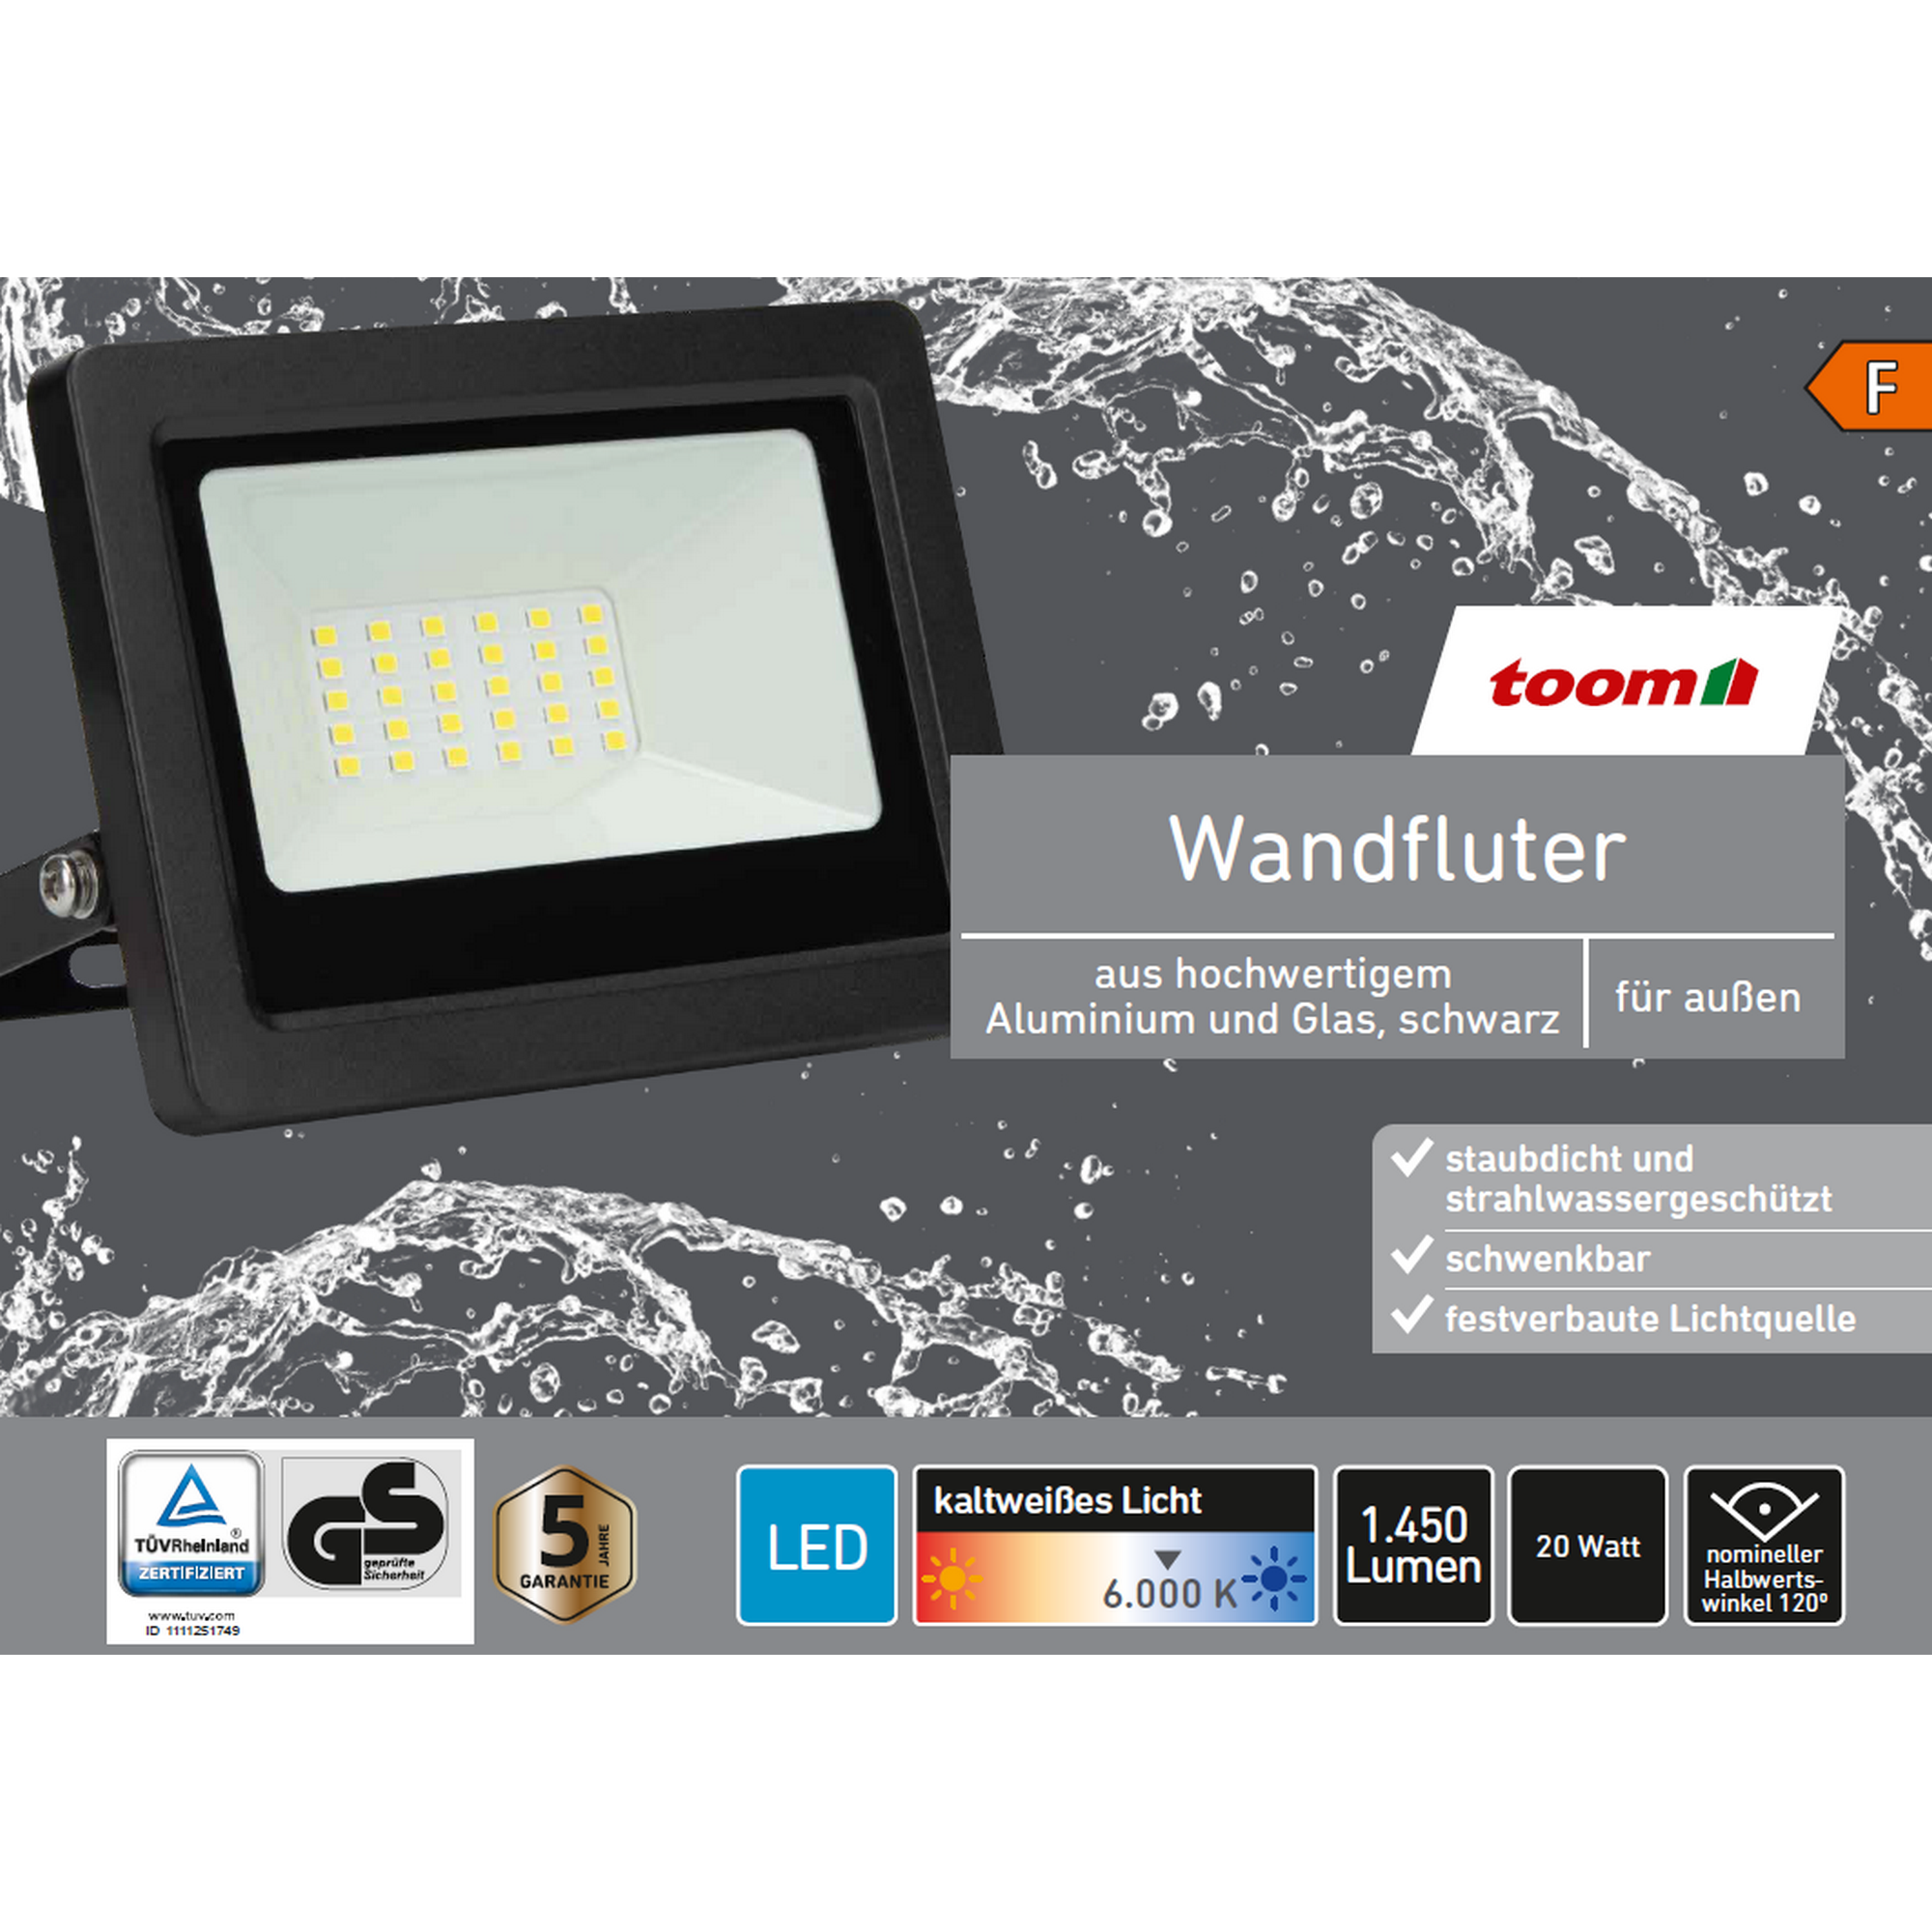 LED-Wandfluter schwarz 20 W 1450 lm + product picture